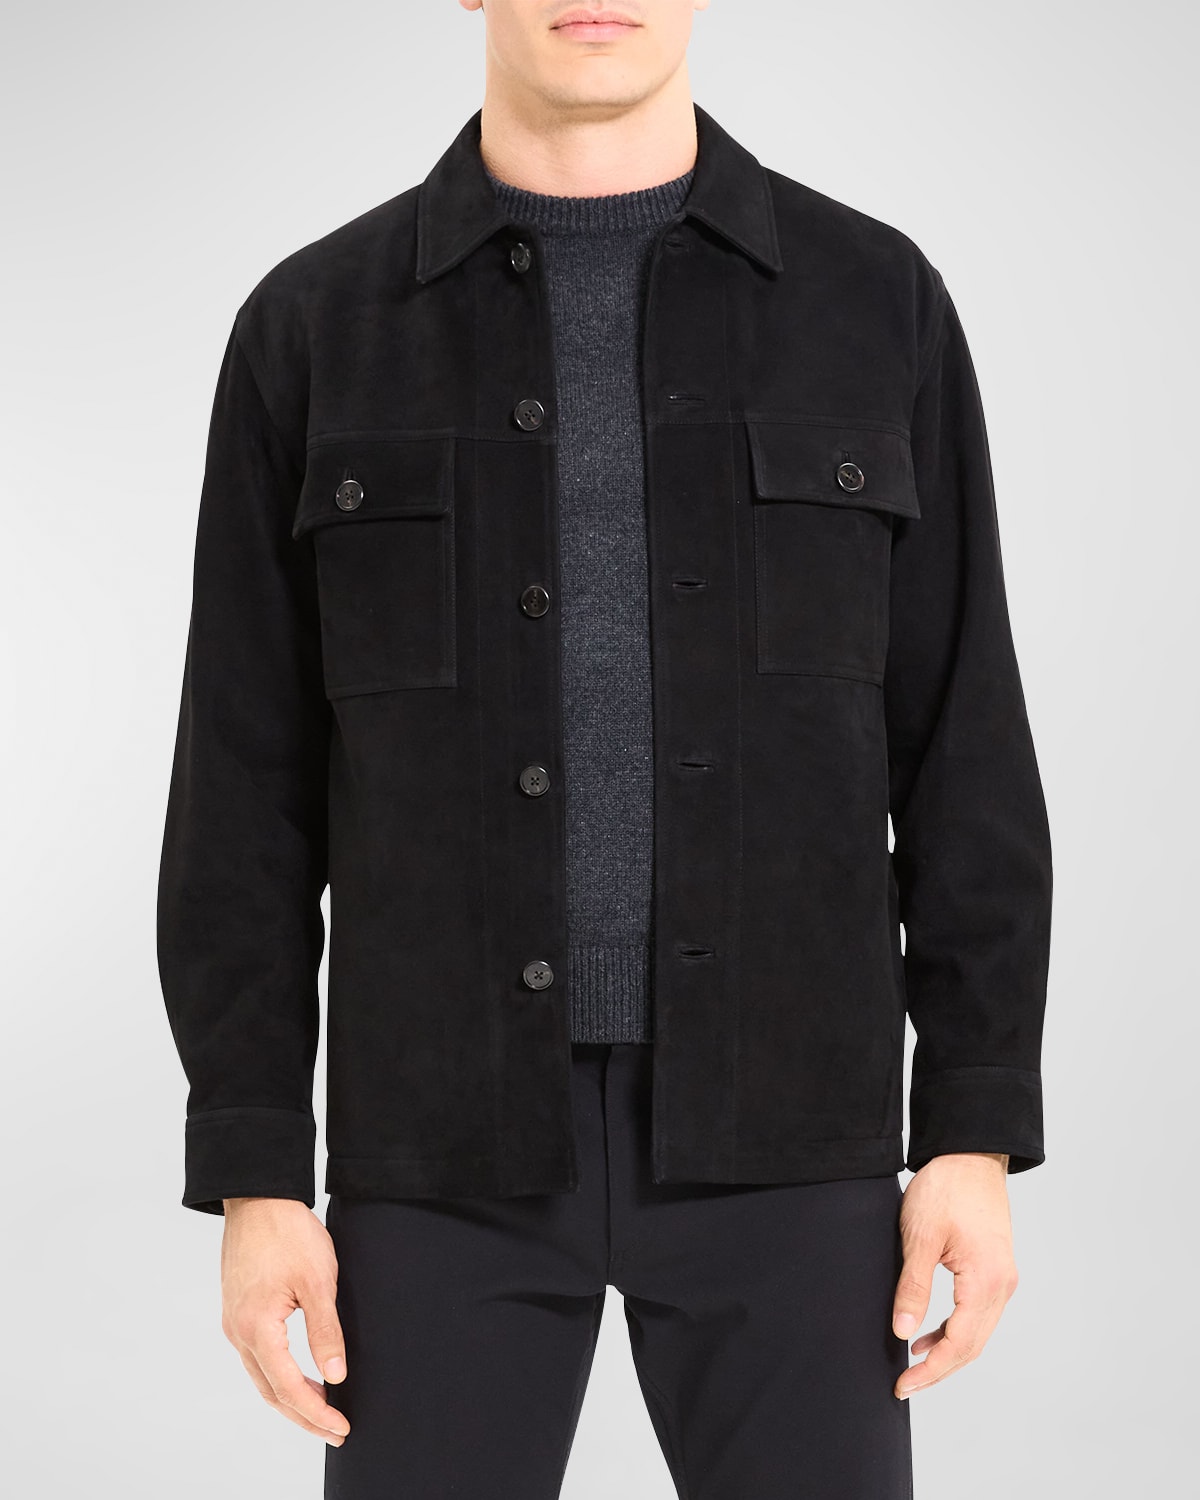 THEORY MEN'S CLOSSON JACKET IN REECE SUEDE